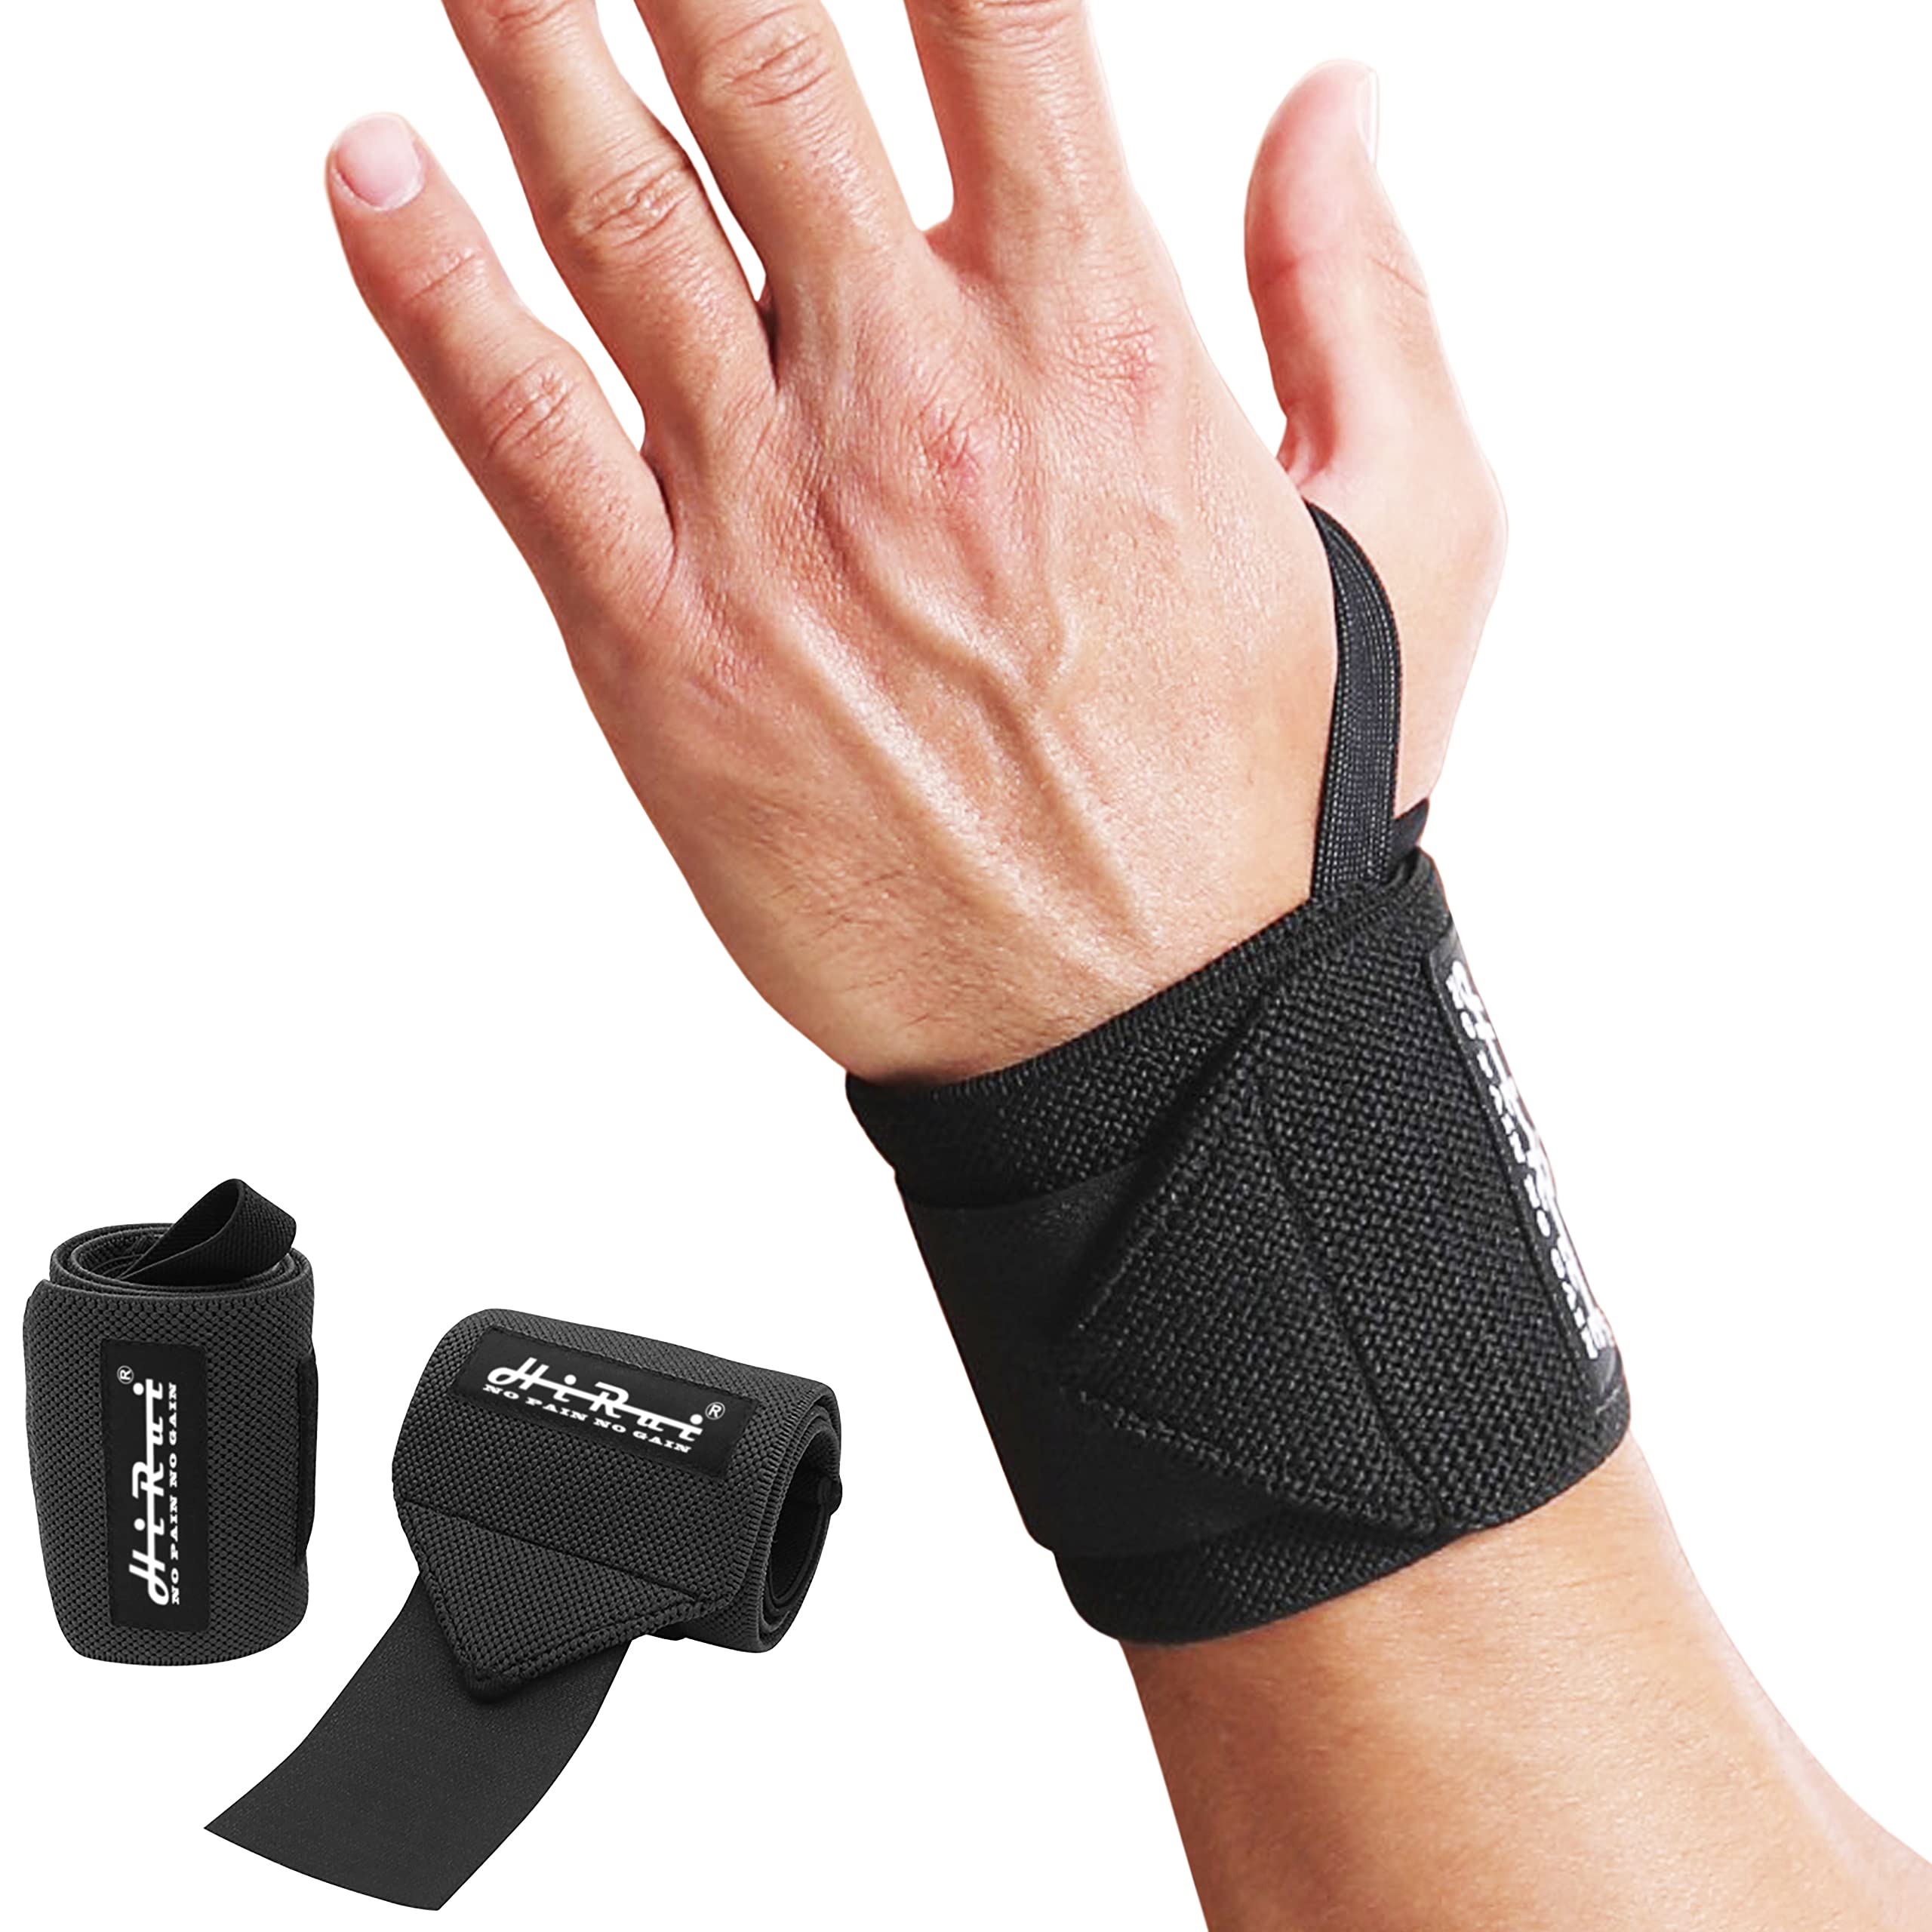  Wrist Wraps Support WeightLifting - 18 Professional